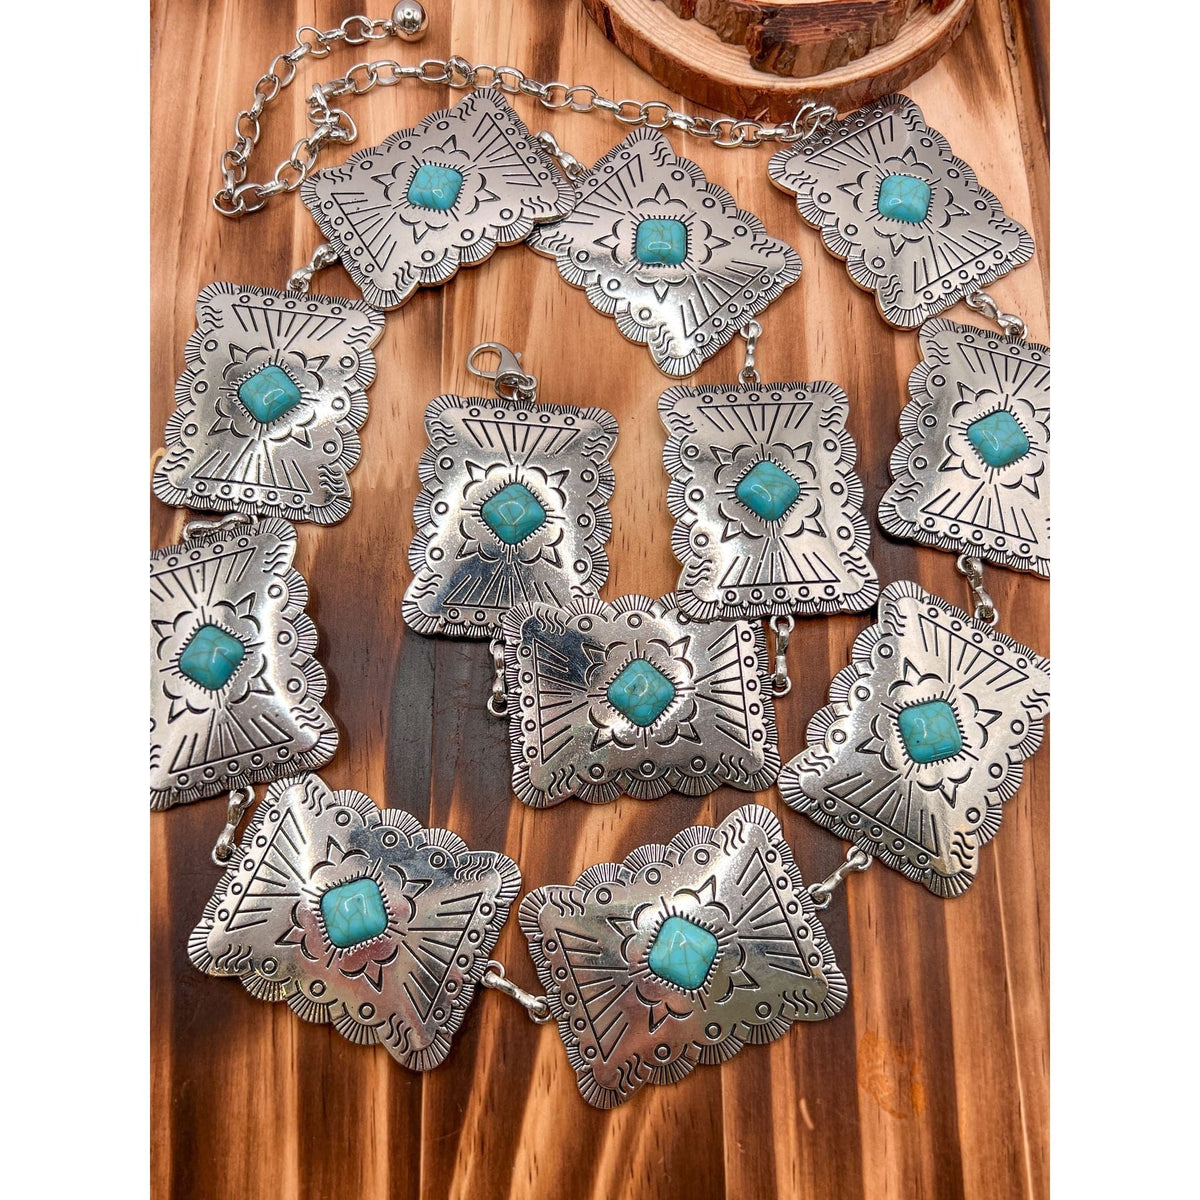 Airstream | Silver Concho Chain Belt With Turquoise Stones | Rectangular Western Belt TheFringeCultureCollective